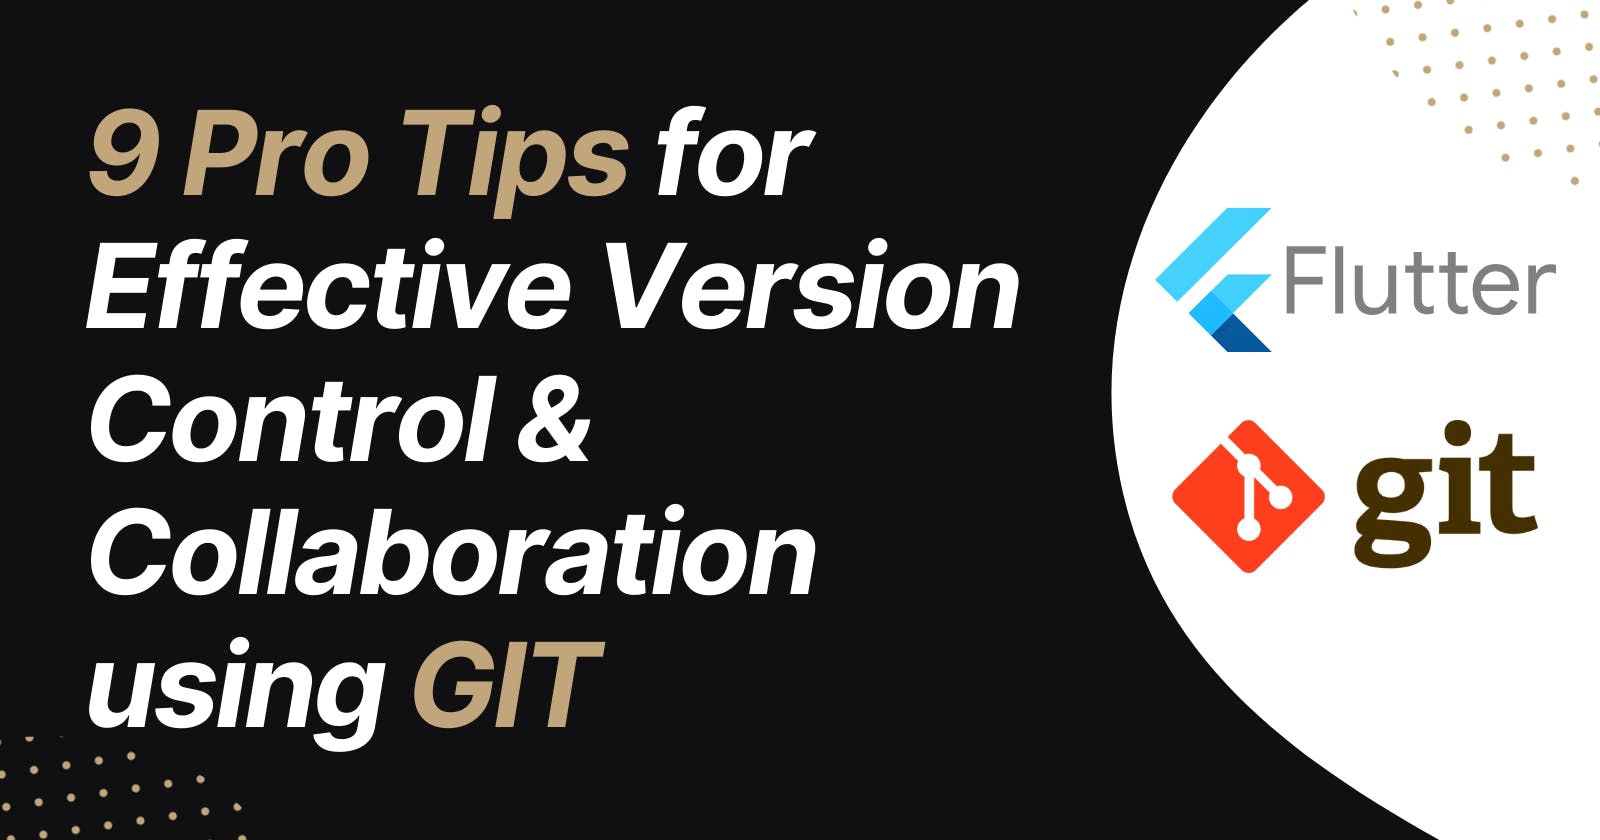 9 Pro Tips for Effective Version Control and Collaboration Using Git